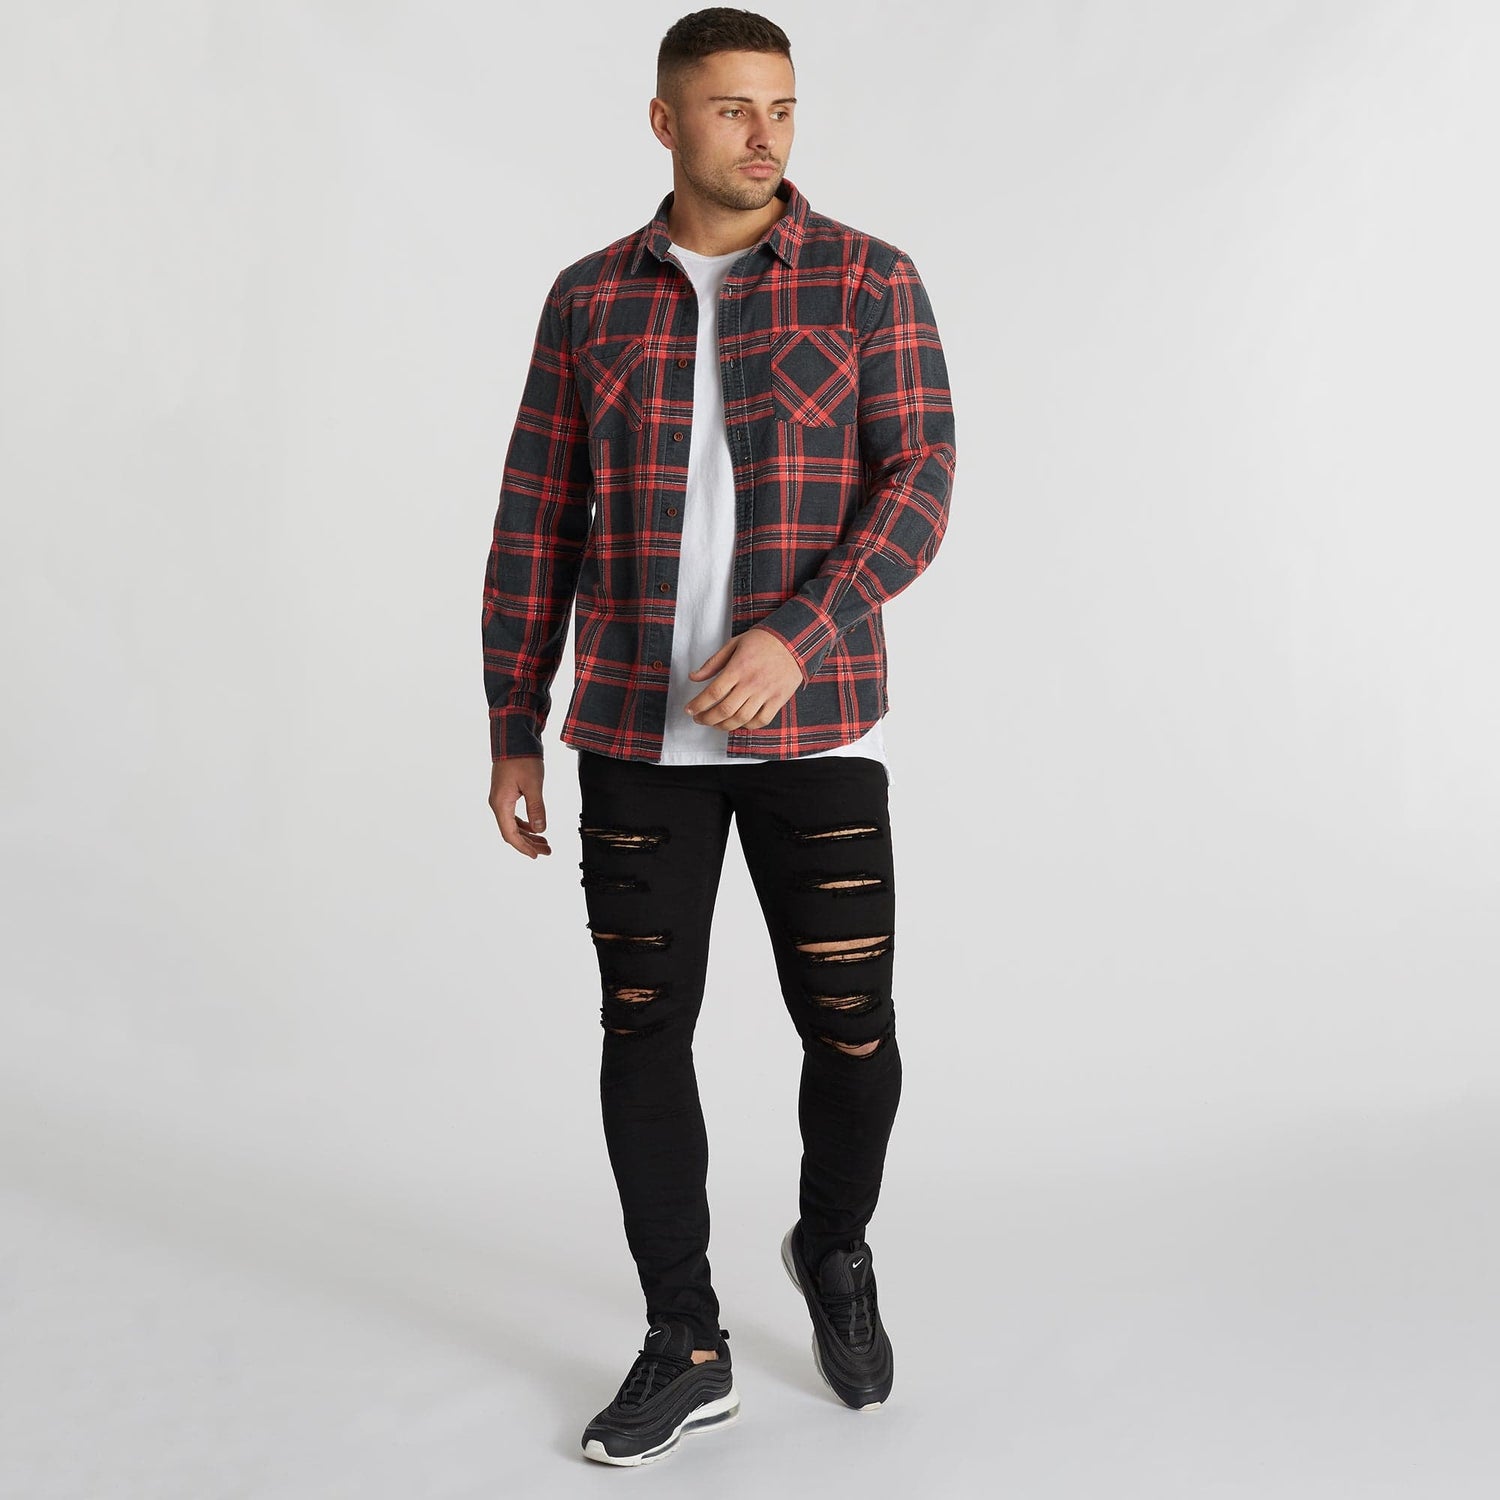 Charge Casual Longsleeve Shirt Black/Red Check